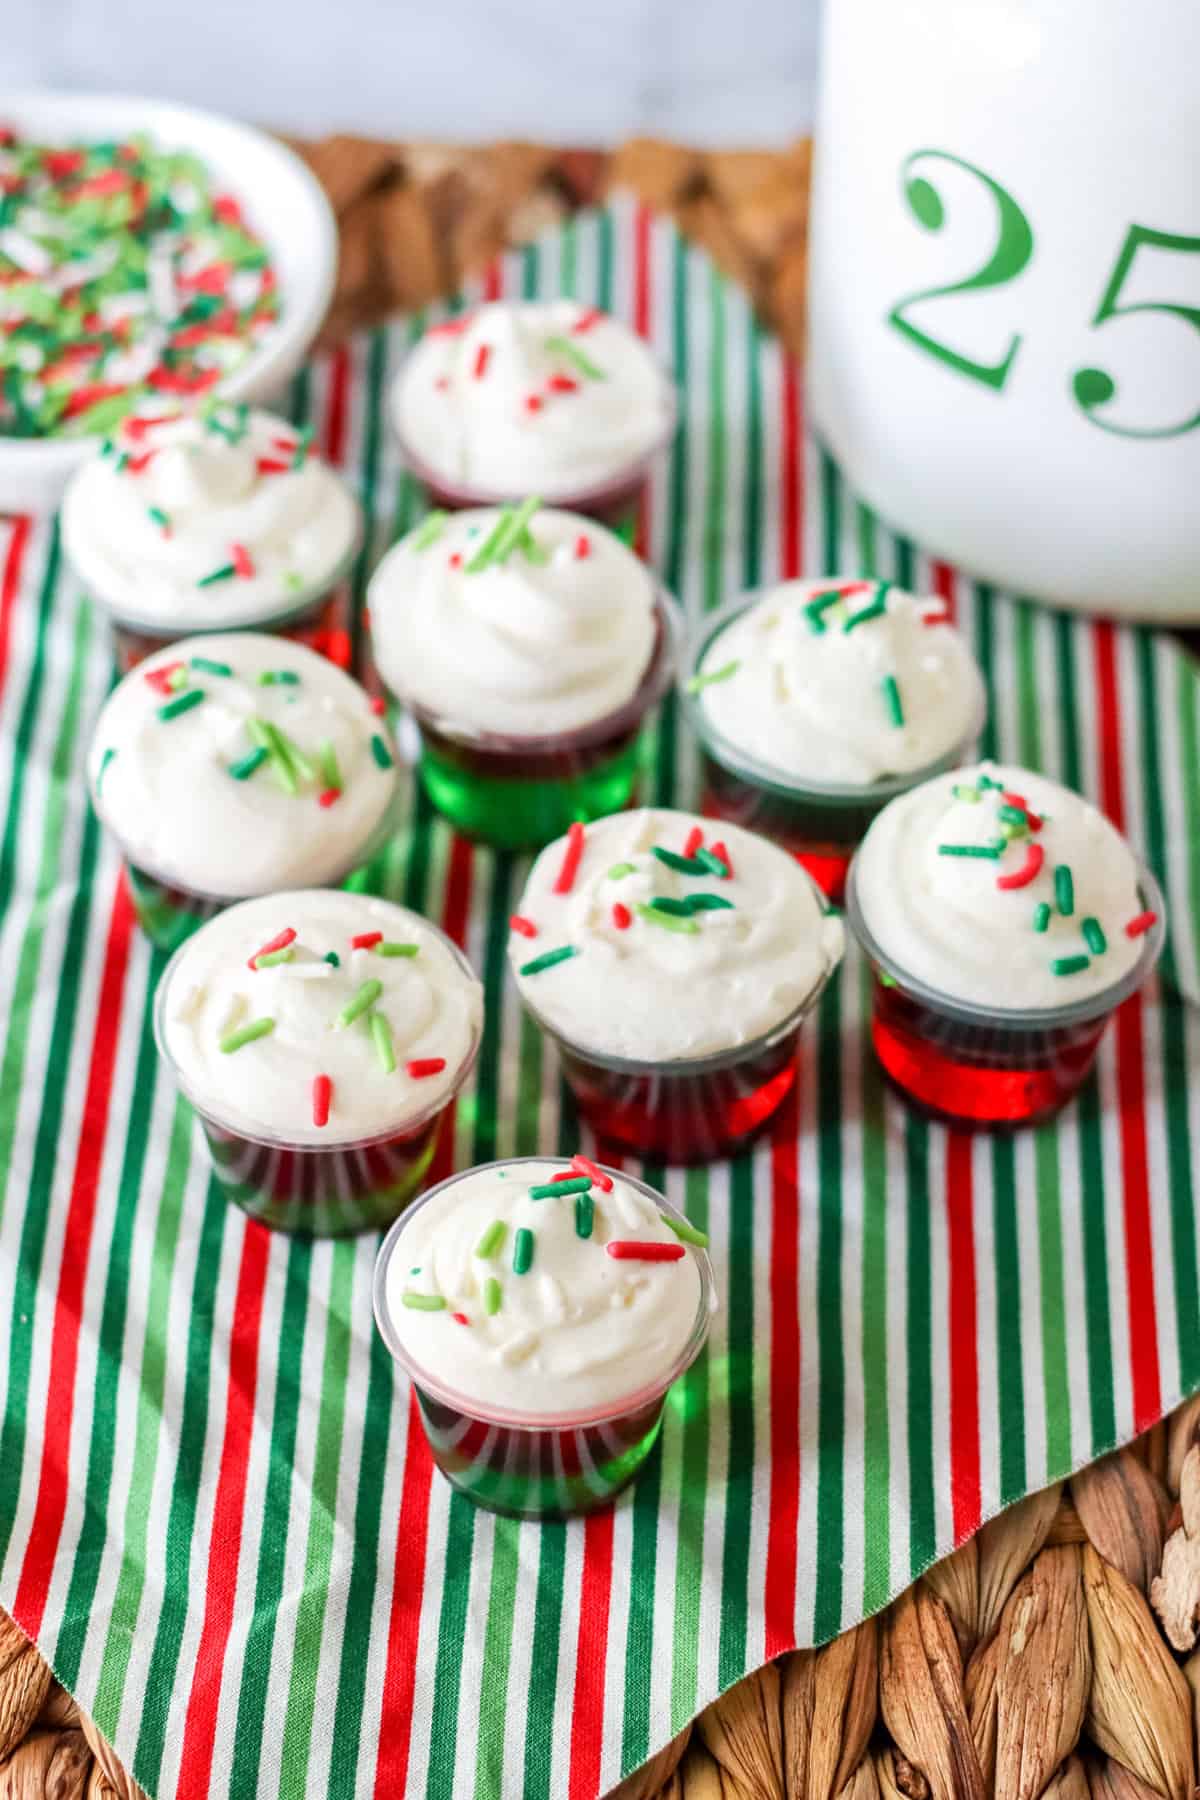 Several Christmas jello shots placed on festive holiday napkin with bowl of red and green sprinkles in the background.